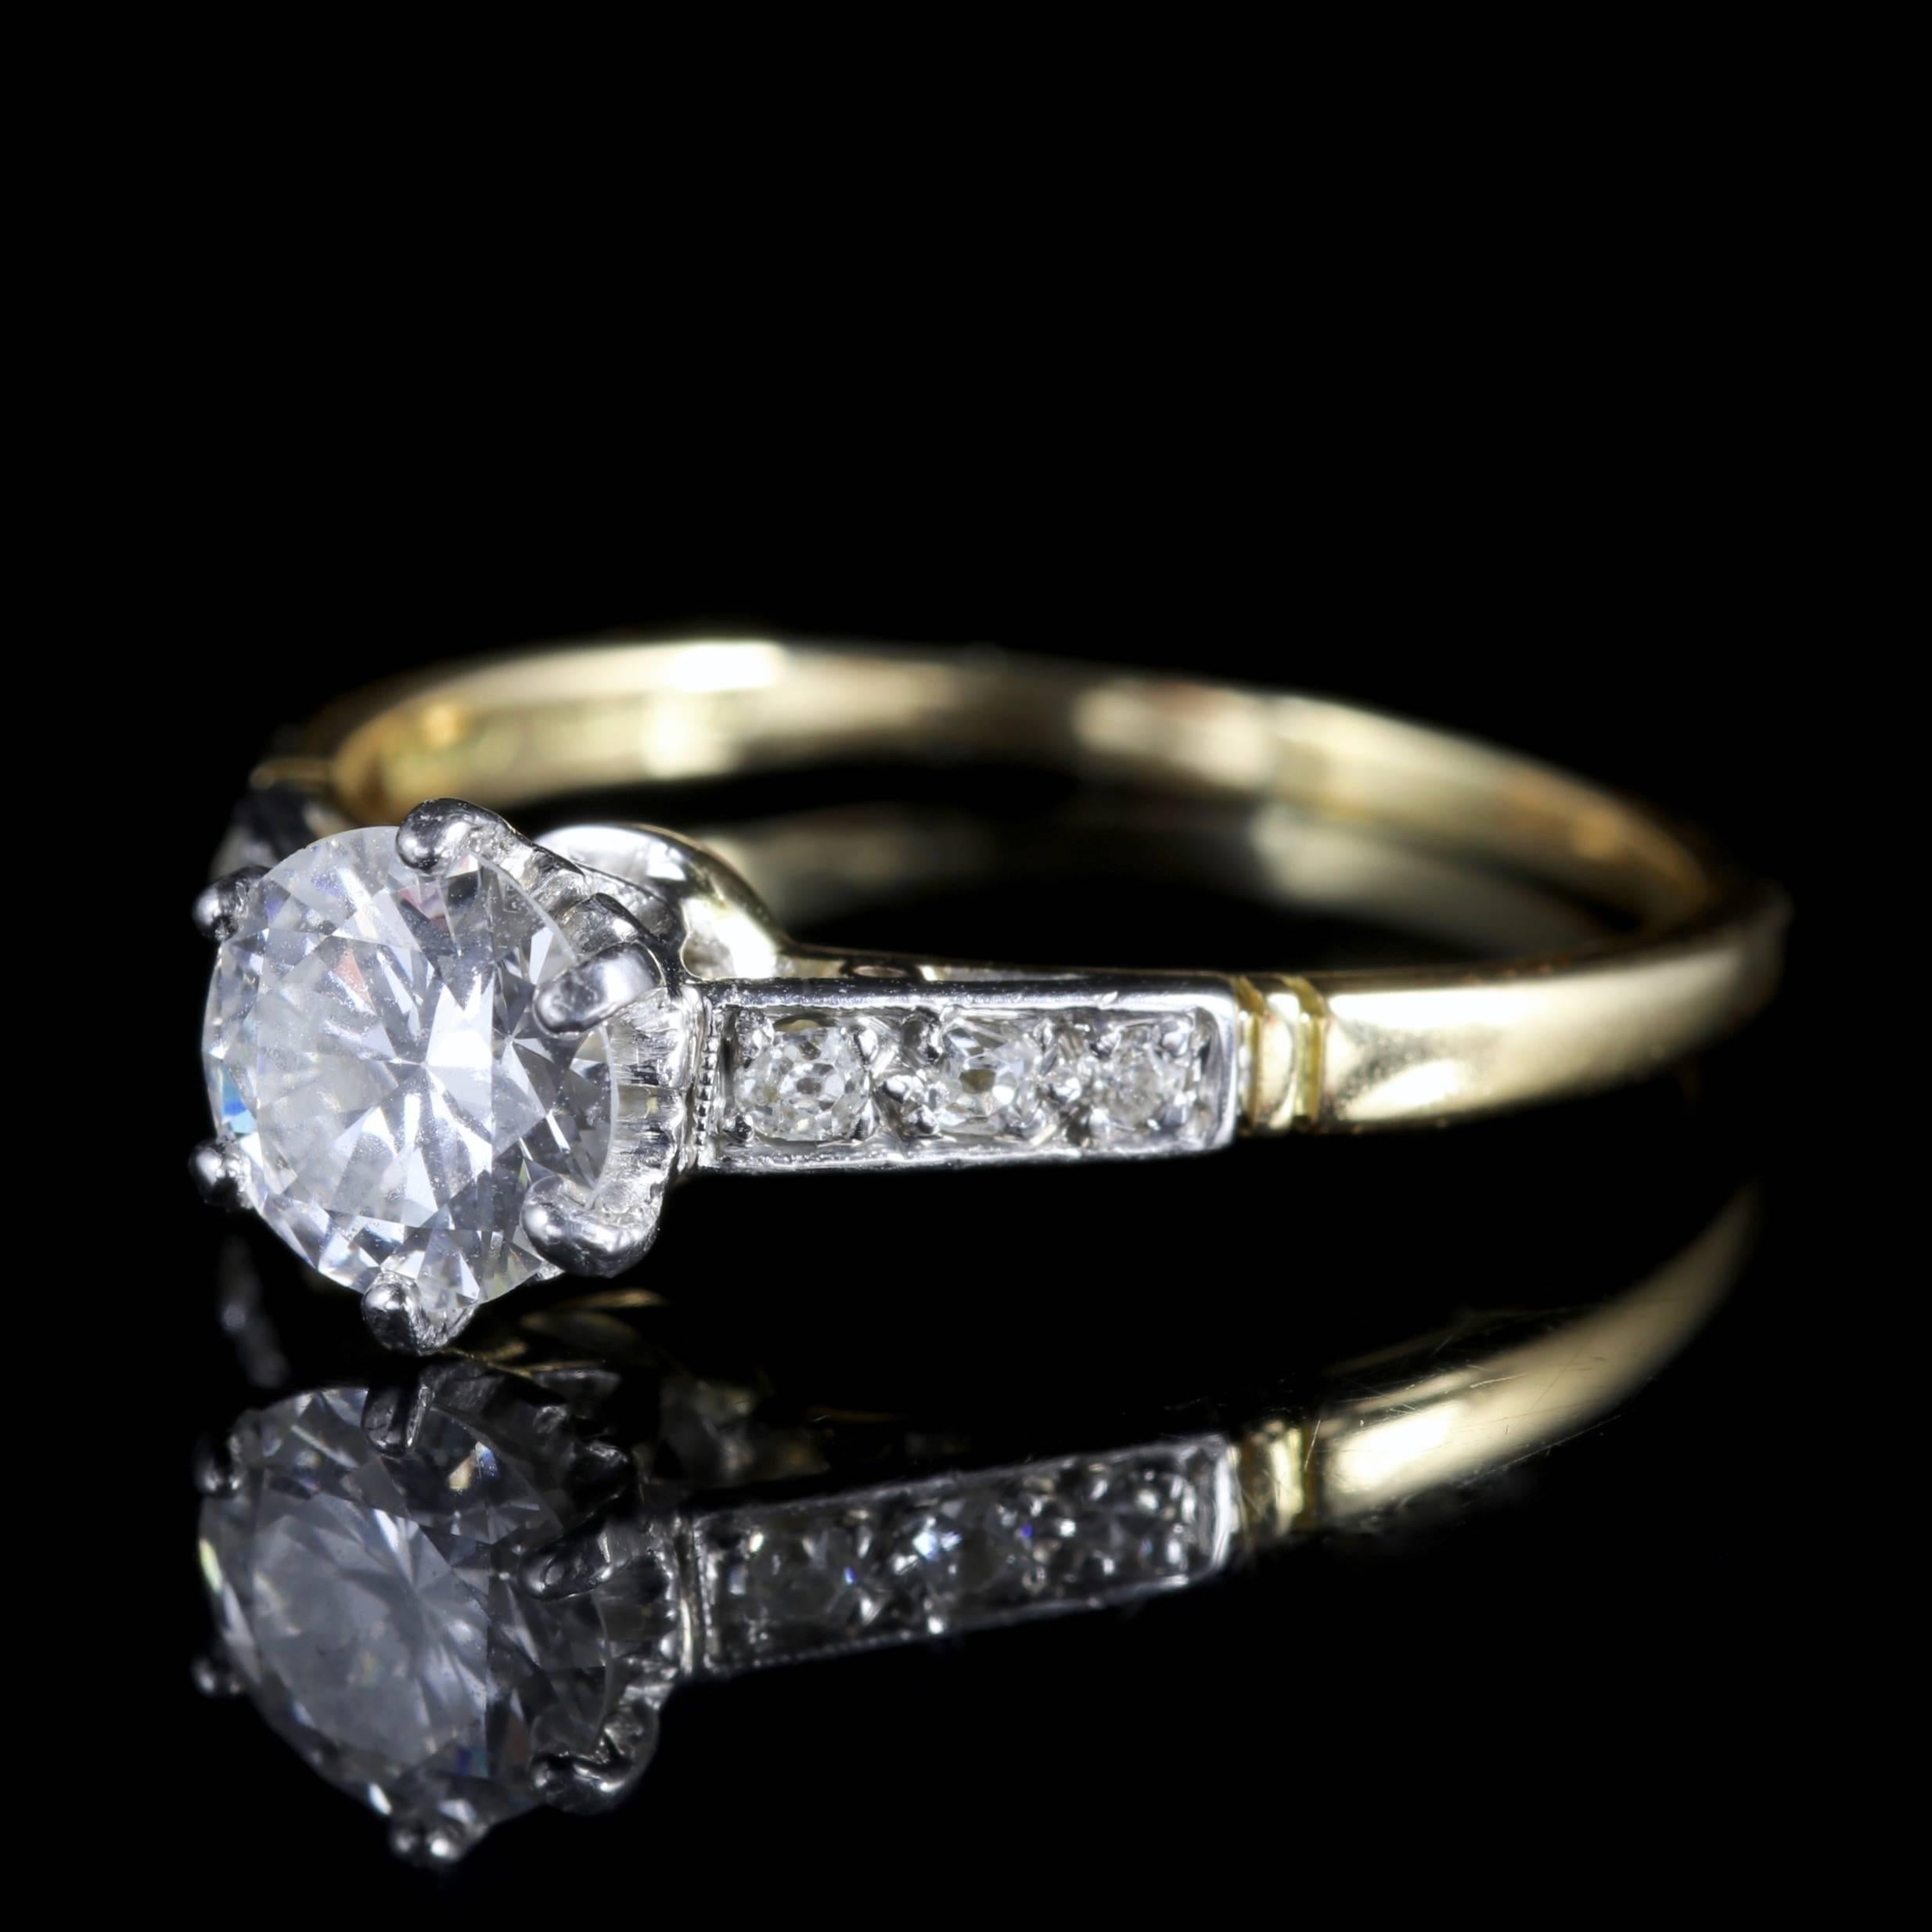 To read more please click continue reading below-

This genuine antique Edwardian 18ct Gold and Platinum solitaire ring is Circa 1915.

The ring boasts a lovely 0.85ct old cut Diamond in the centre which is superb cut, colour and clarity - VS1 H